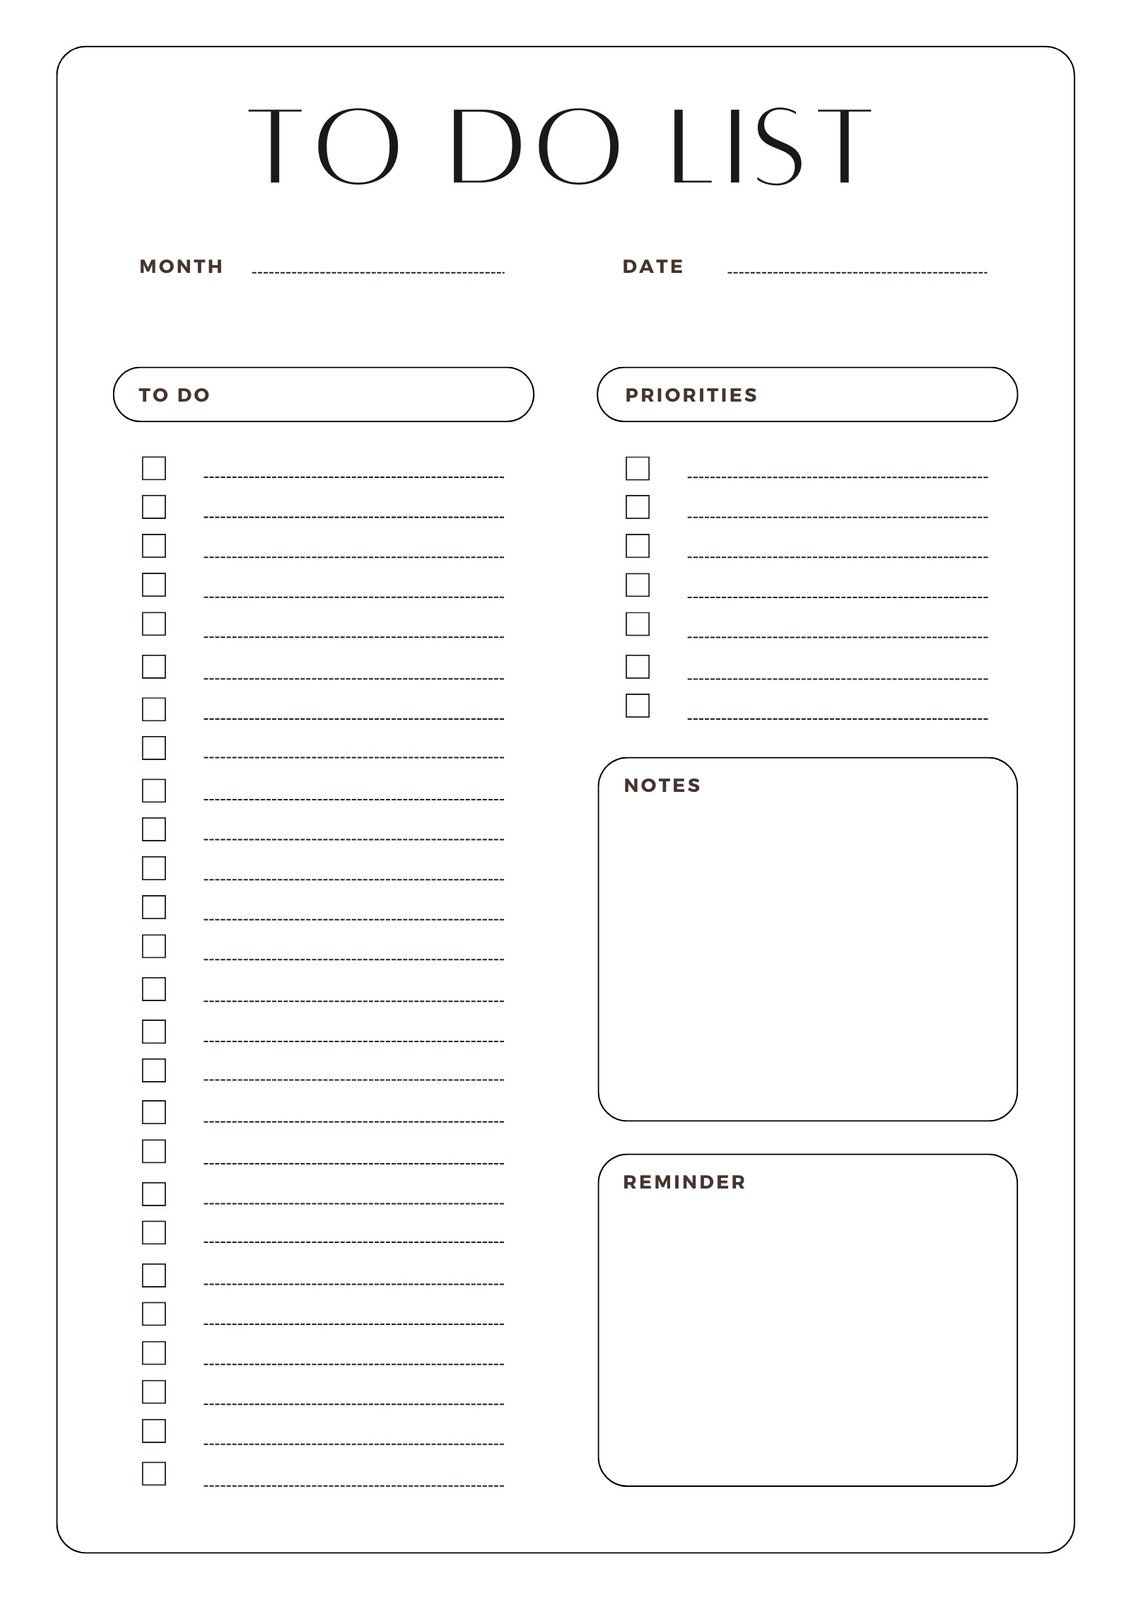 Master To Do List TemplateFREE Printable & Tips to Boost Productivity